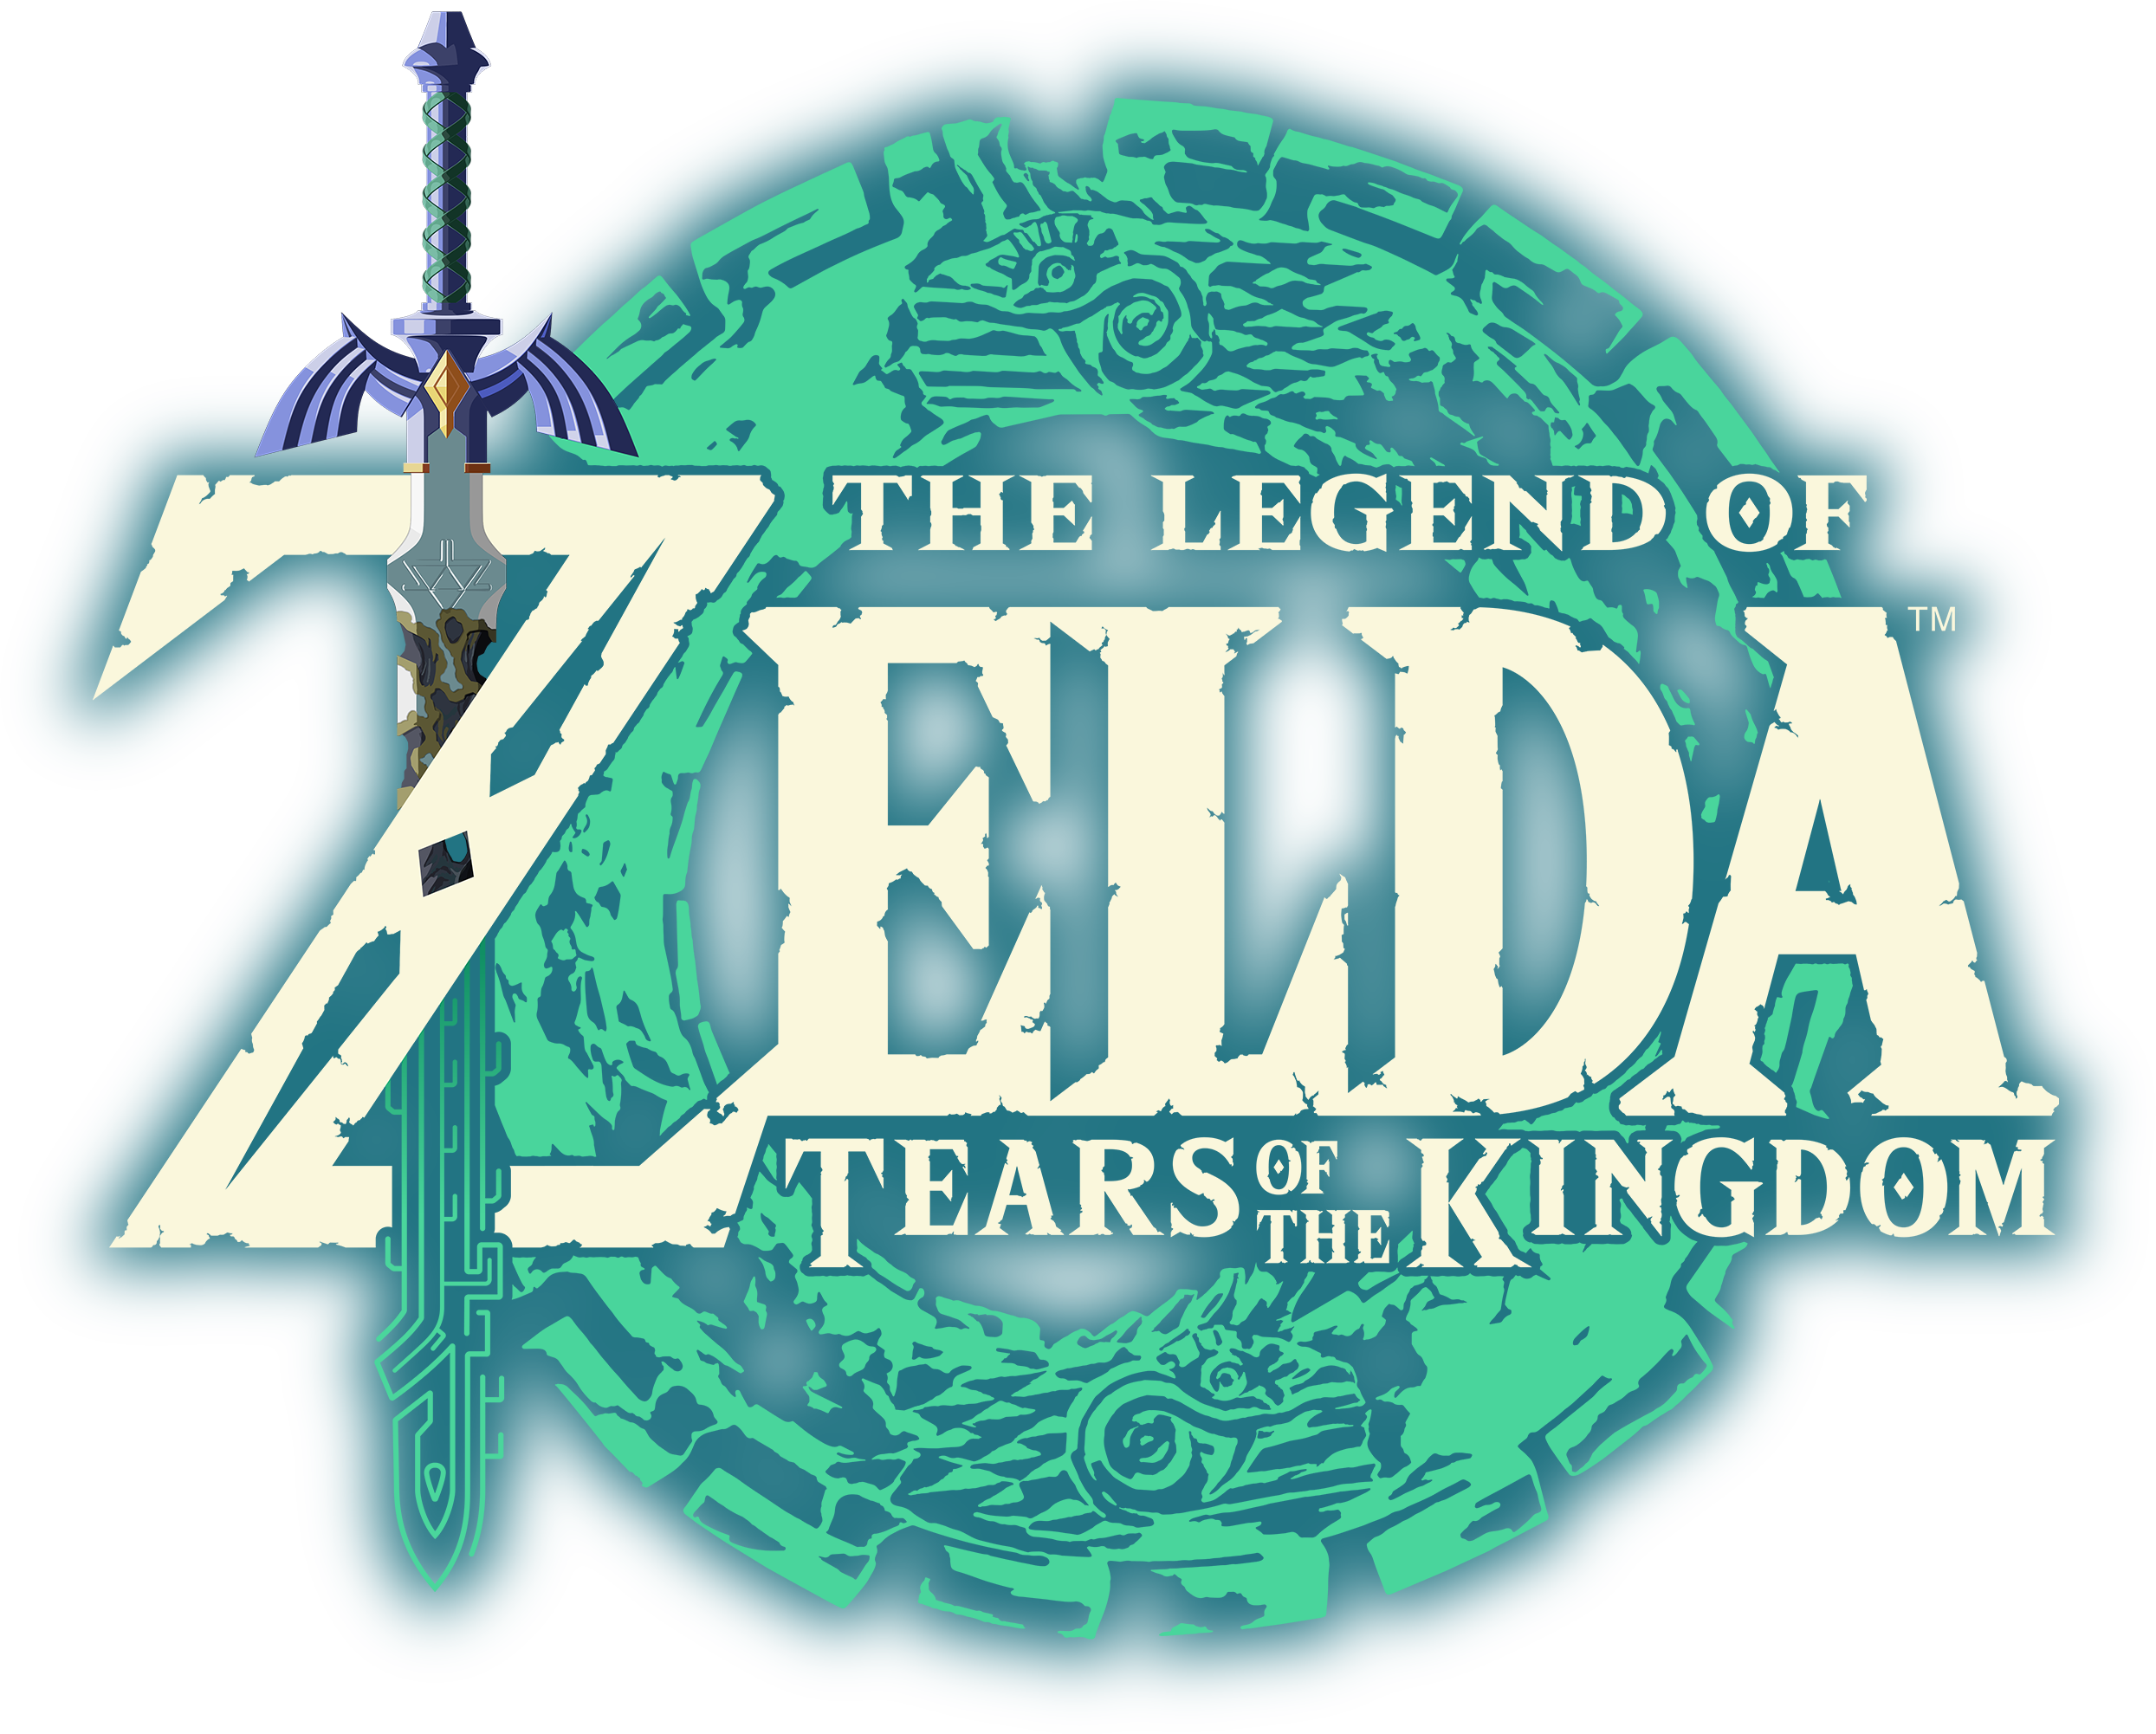 The Legend of Zelda: Tears of the Kingdom Reviews Go Live on May